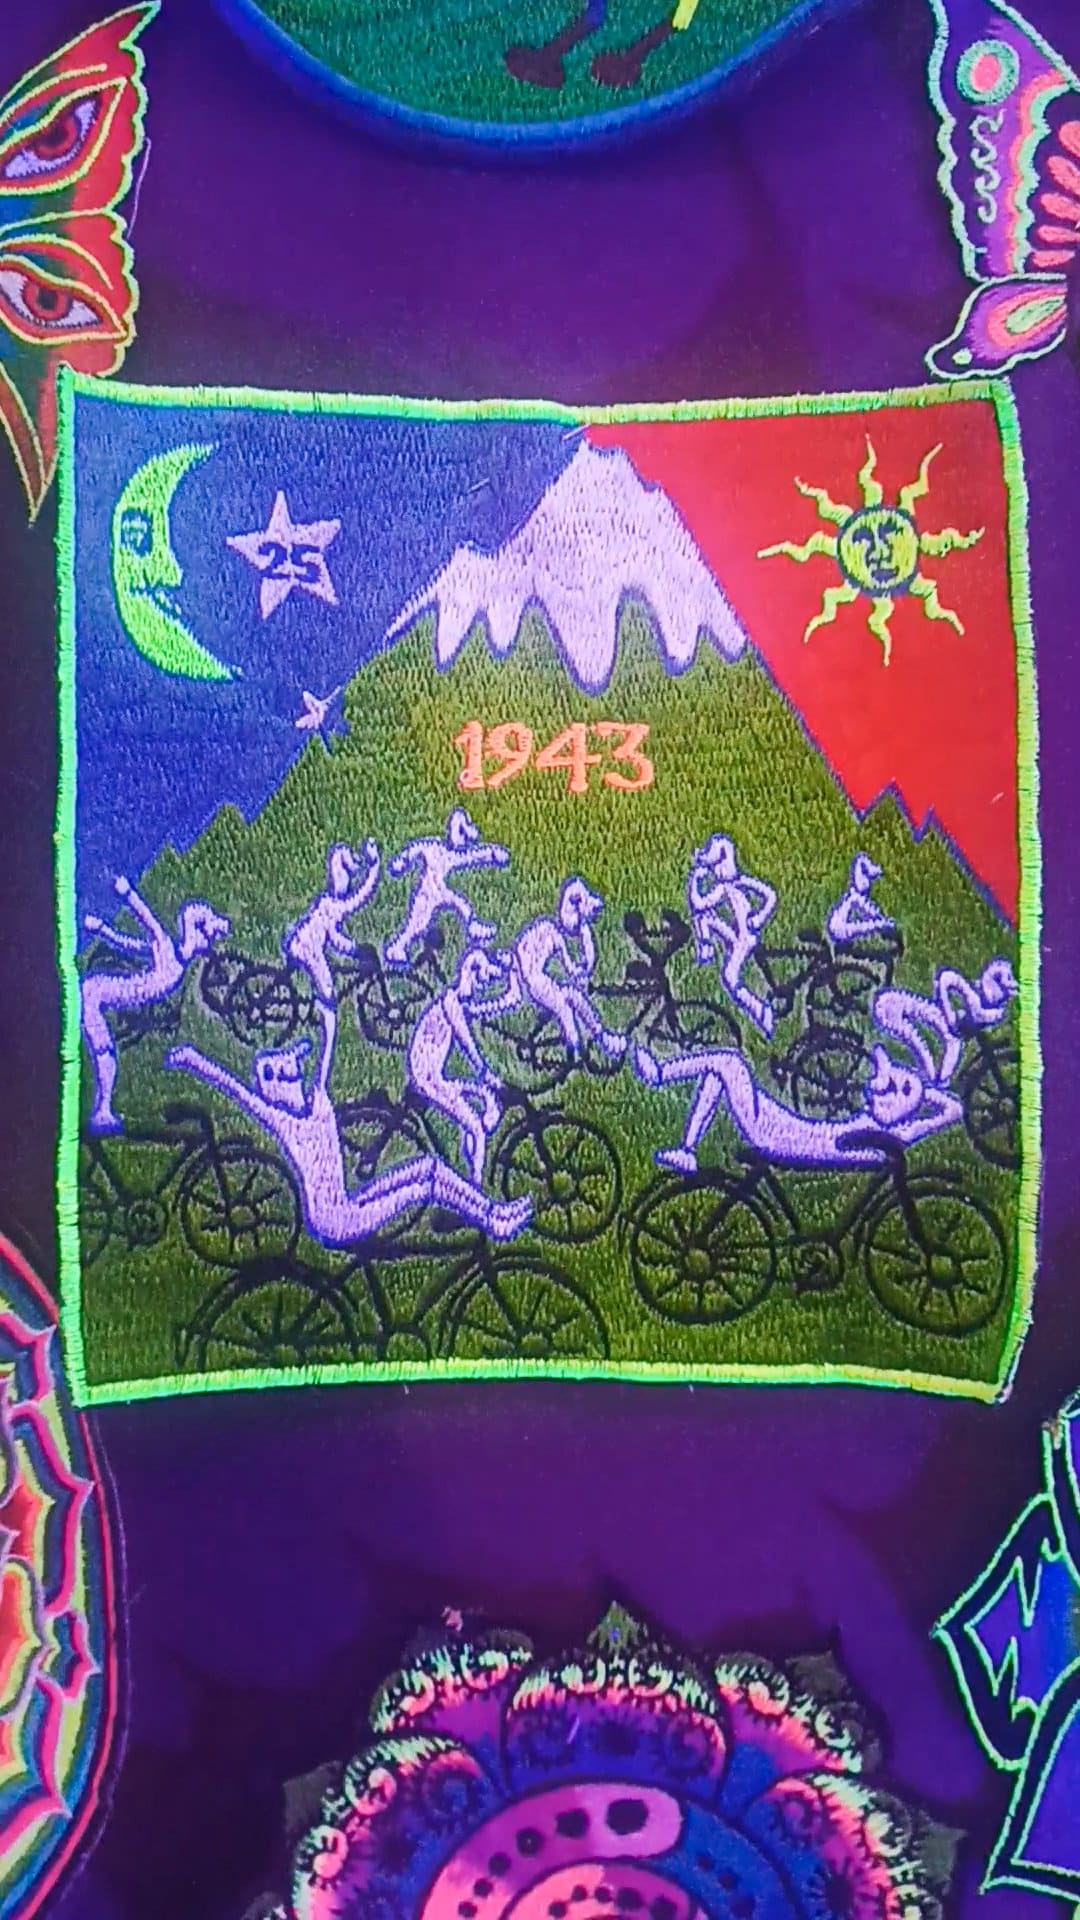 Hofmann Bicycle Day Party Patch Psychedelic Hippie Leary Albert Hofmann discovery of LSD vintage artwork